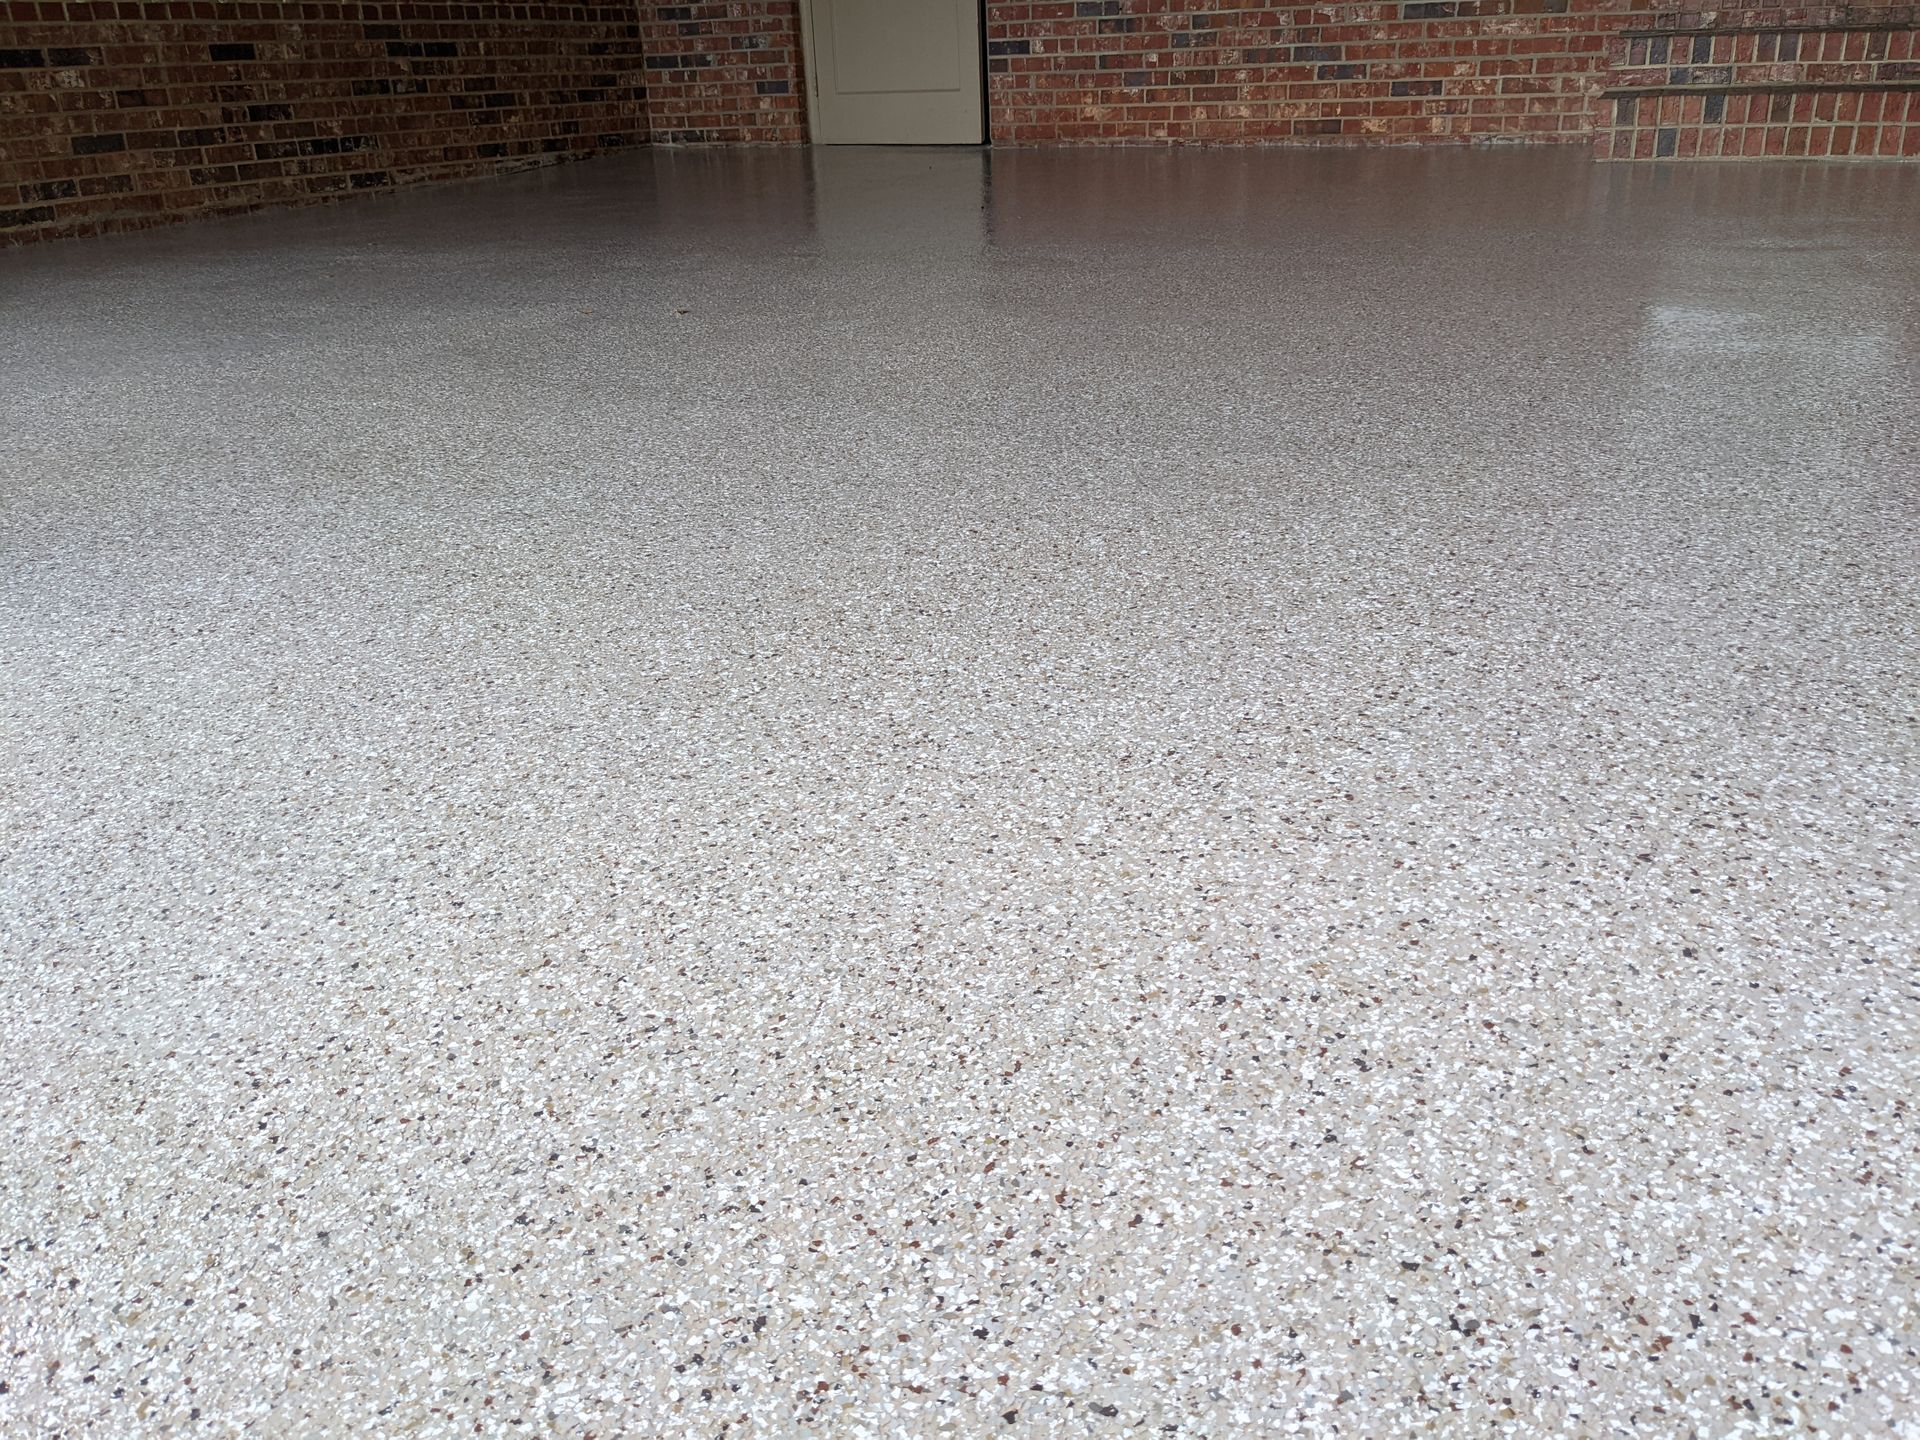 A garage floor with epoxy coatings with a brick wall in the background.